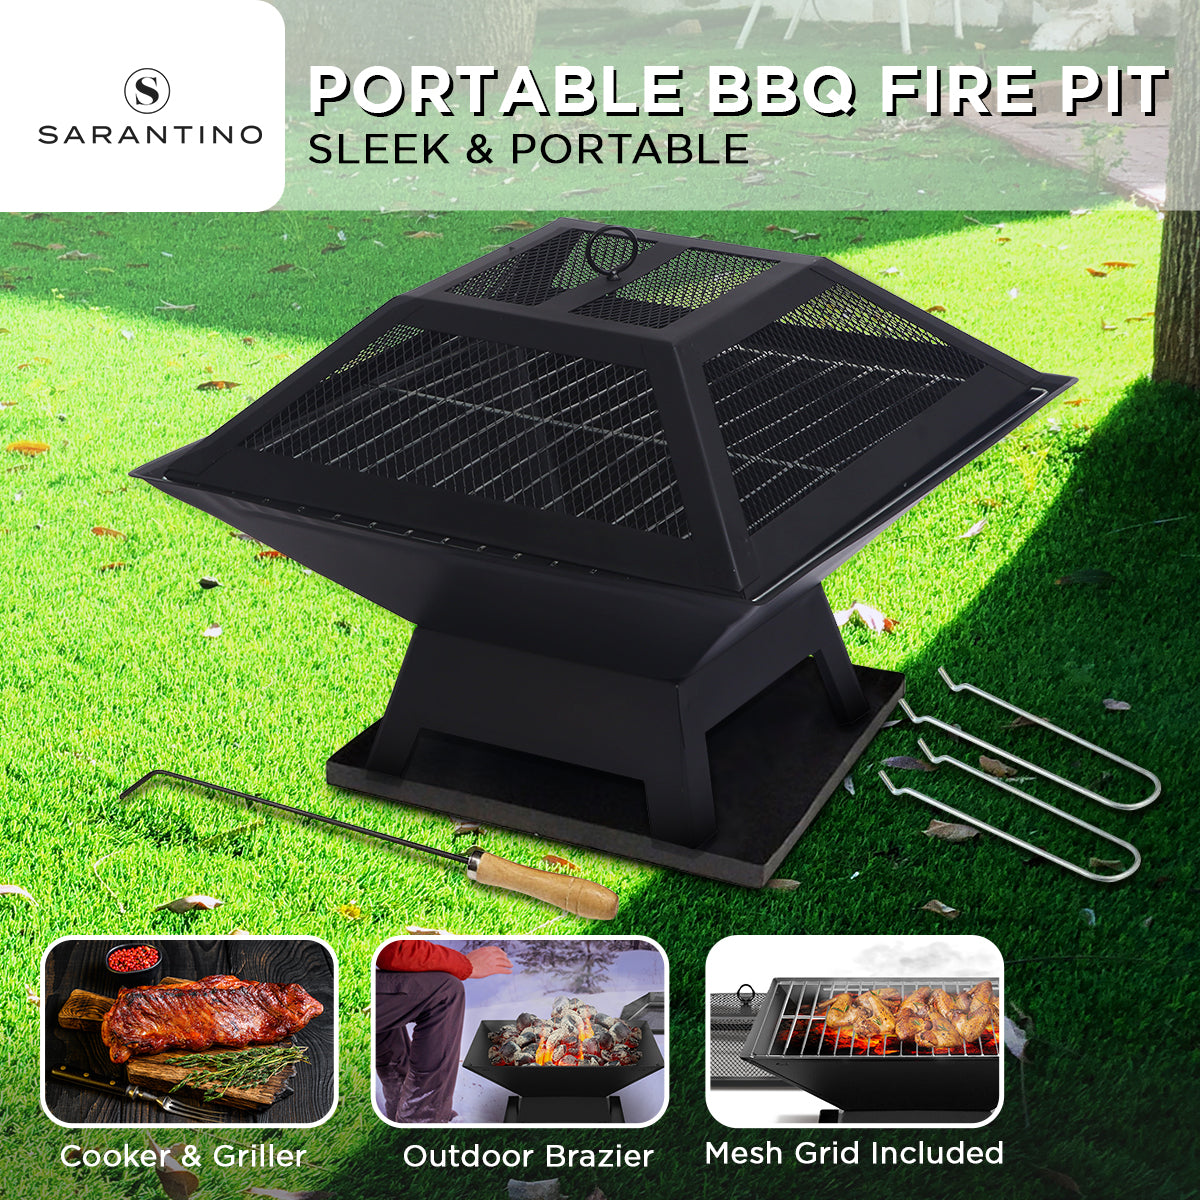 Wallaroo Portable Outdoor Fire Pit for BBQ, Grilling, Cooking, Camping - SILBERSHELL